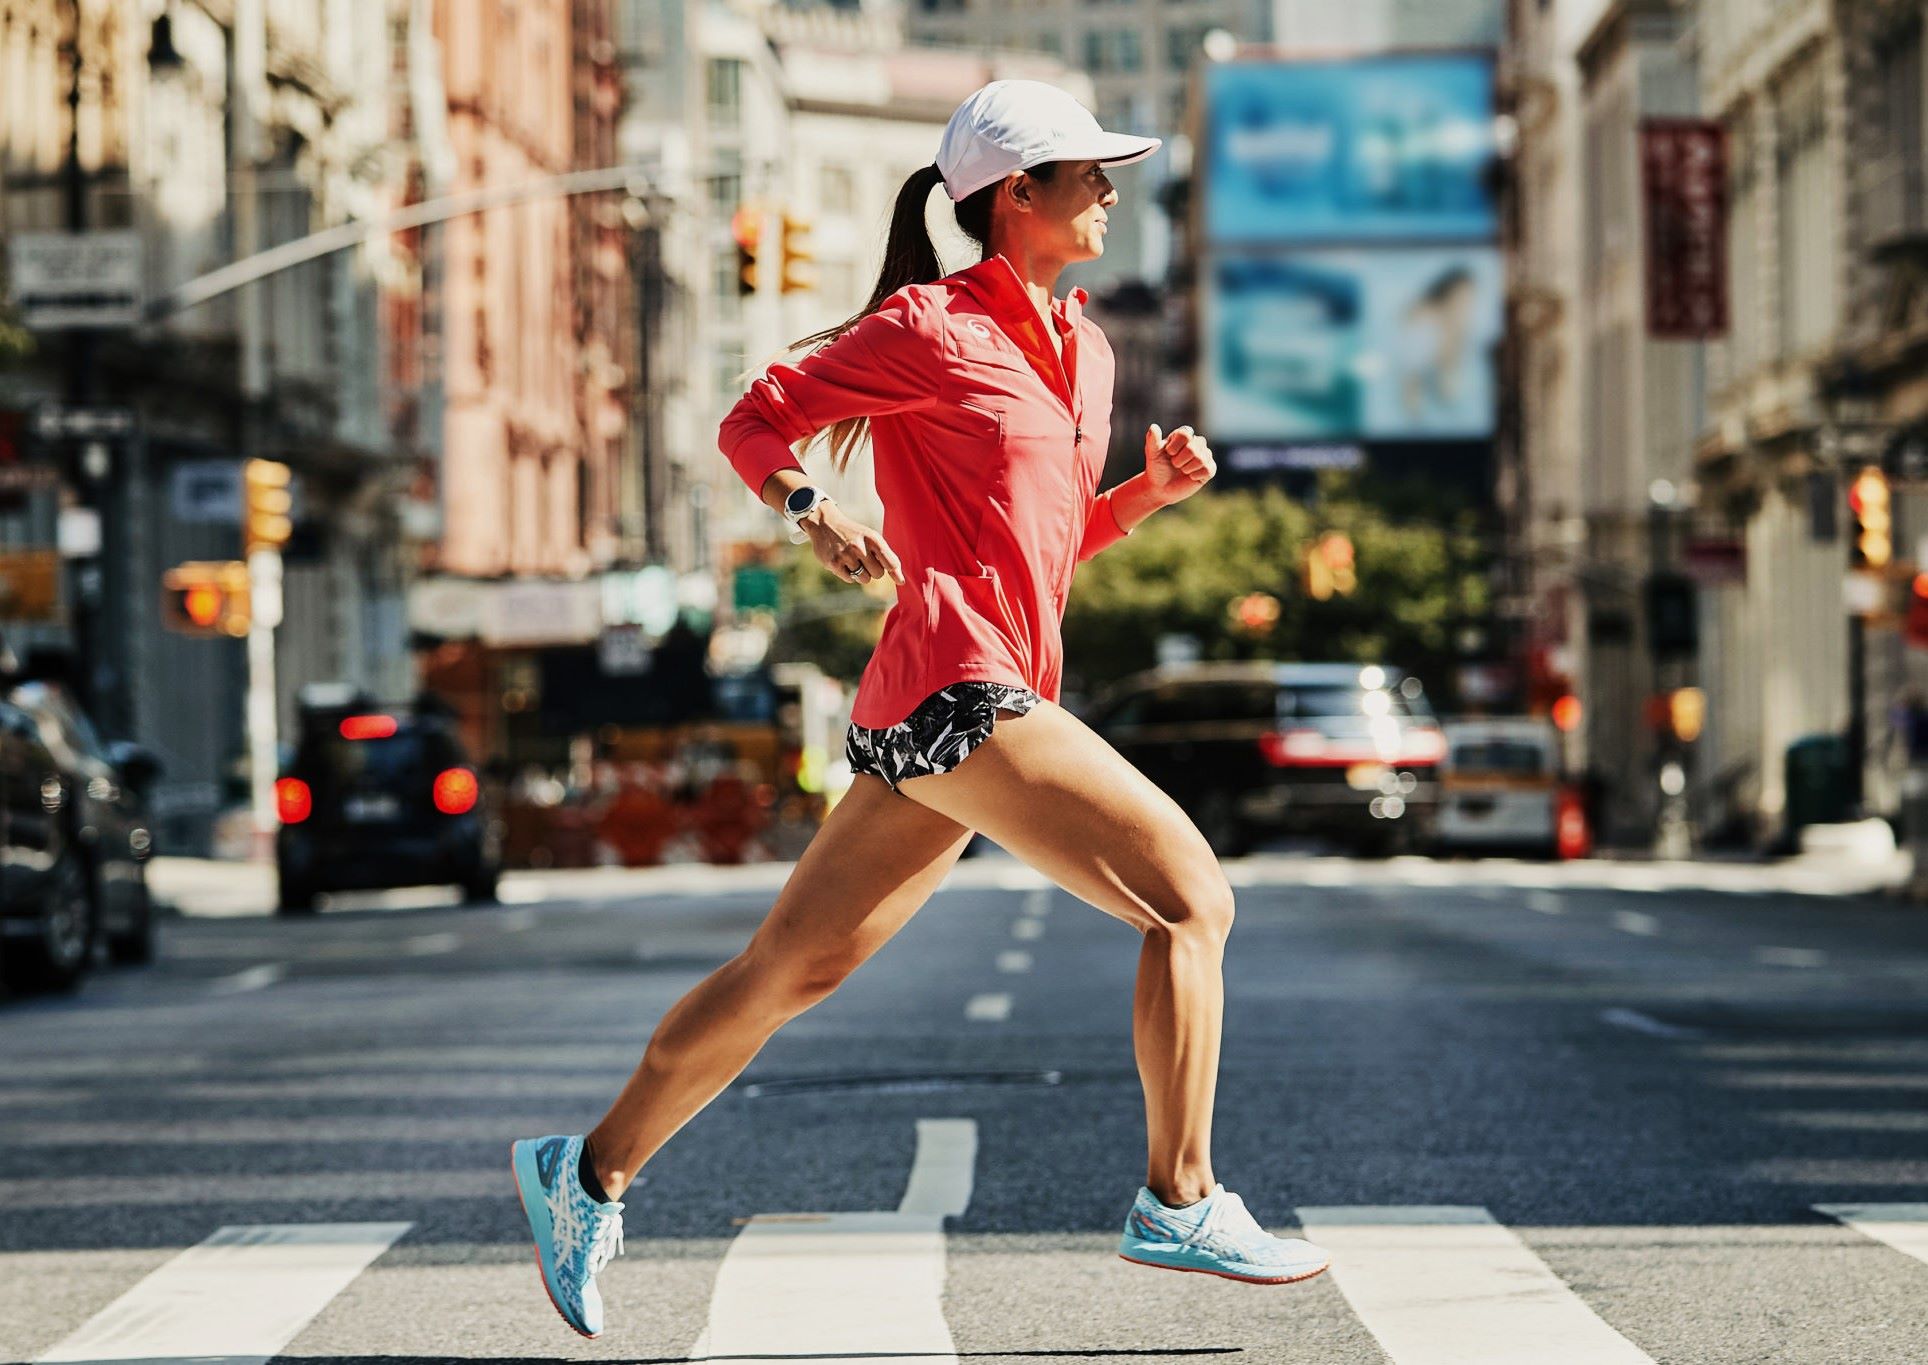 How To Avoid Common Mistakes As A New Runner